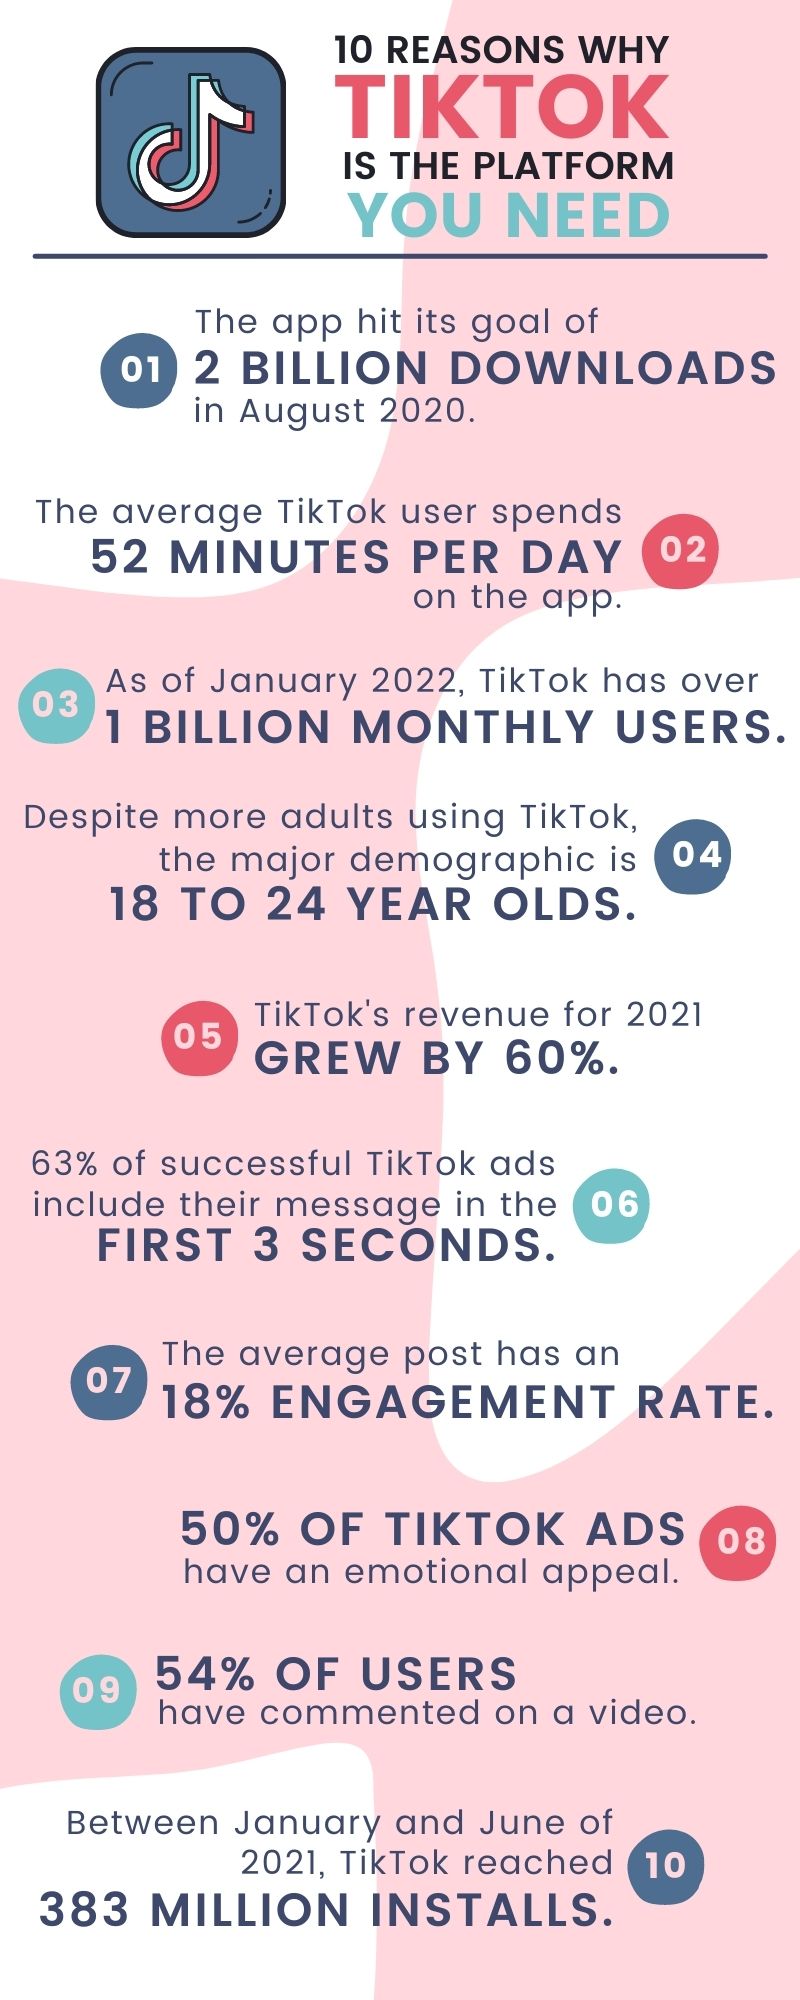 10 Reasons Why TikTok is the Platform You Need